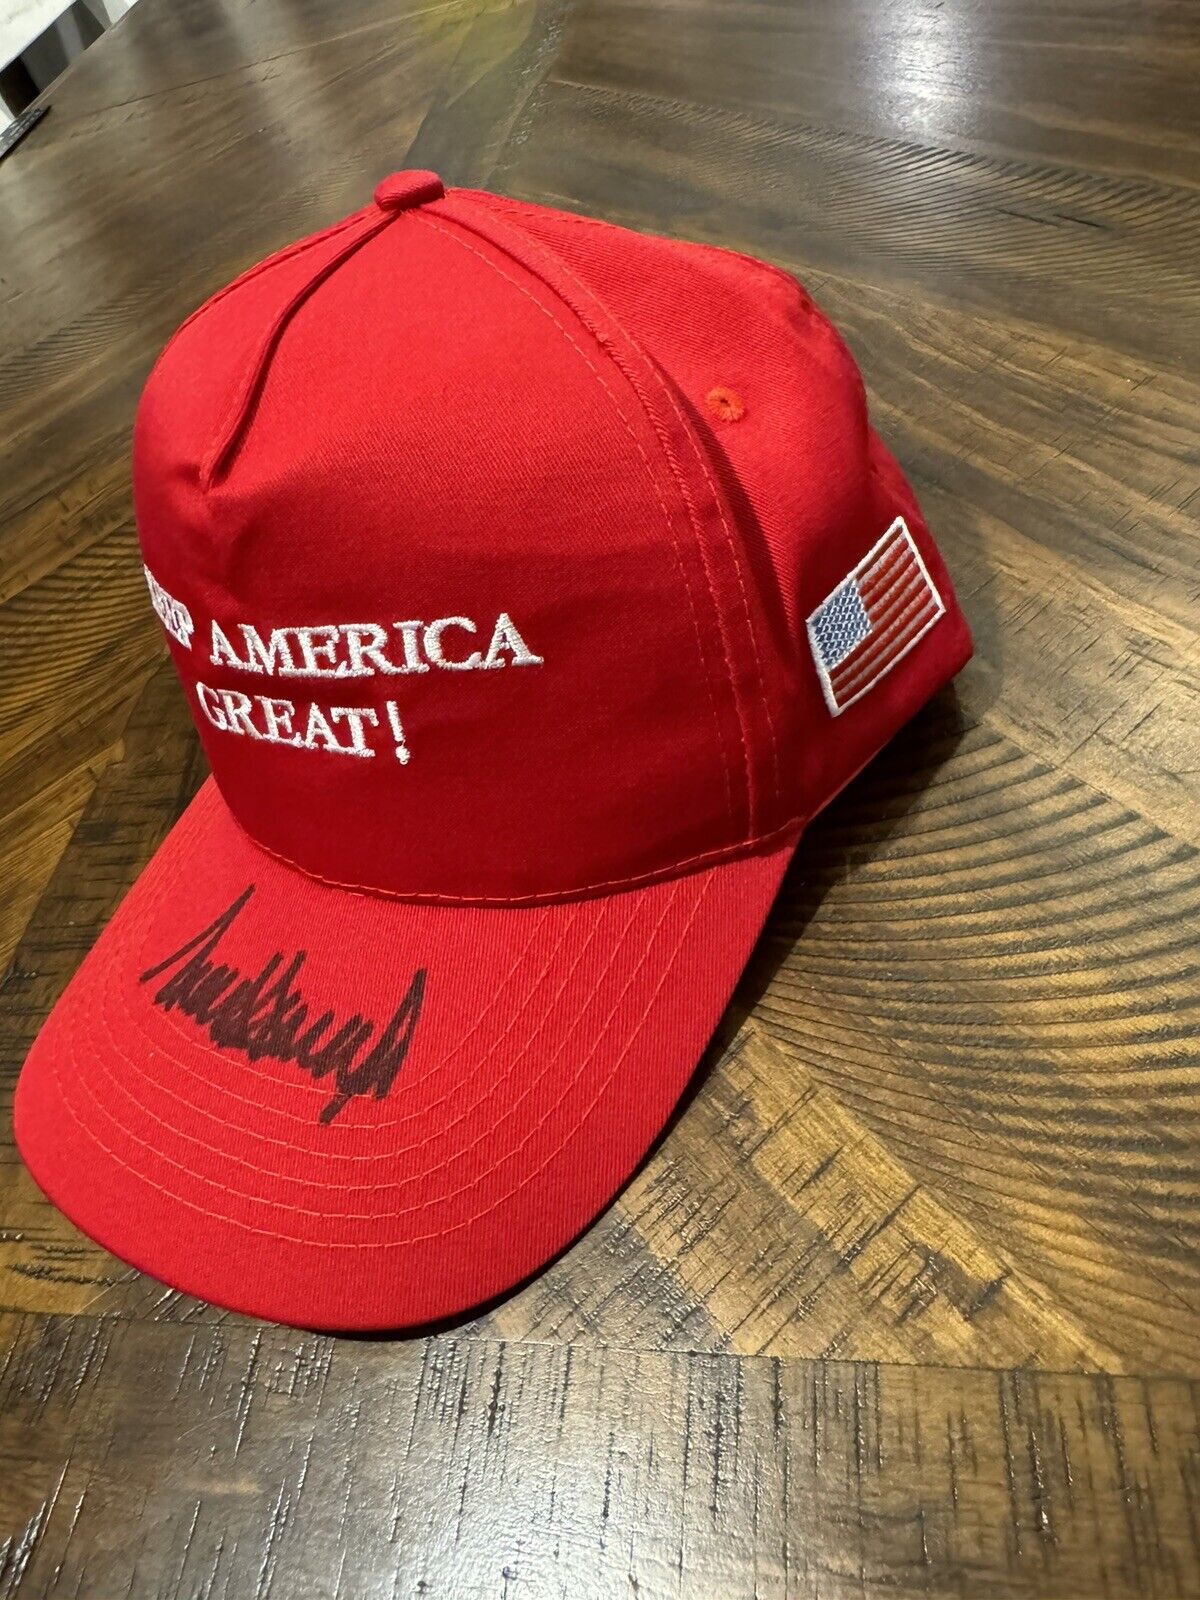 PRESIDENT DONALD TRUMP SIGNED AUTOGRAPH HAT WITH COA KEEP AMERICA GREAT KAG